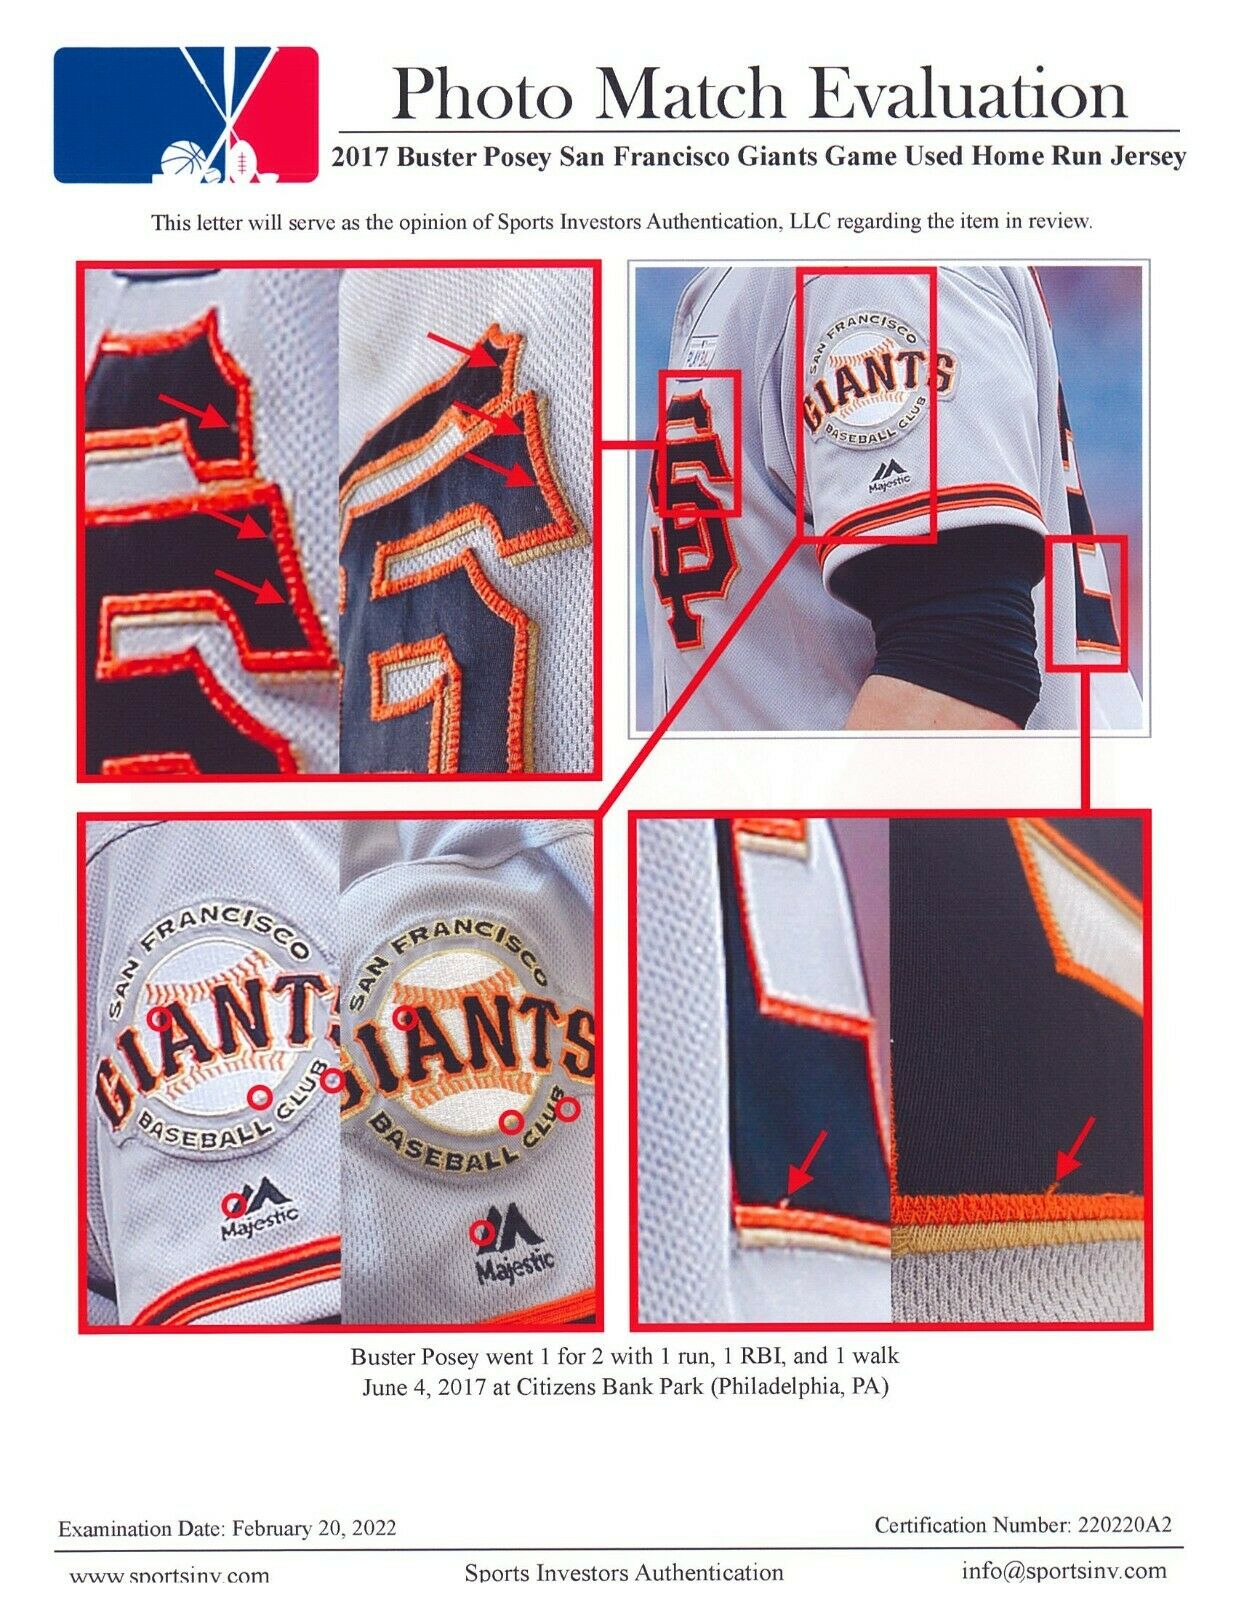 Buster Posey 2017 Game Used San Francisco Giants Jersey Home Run